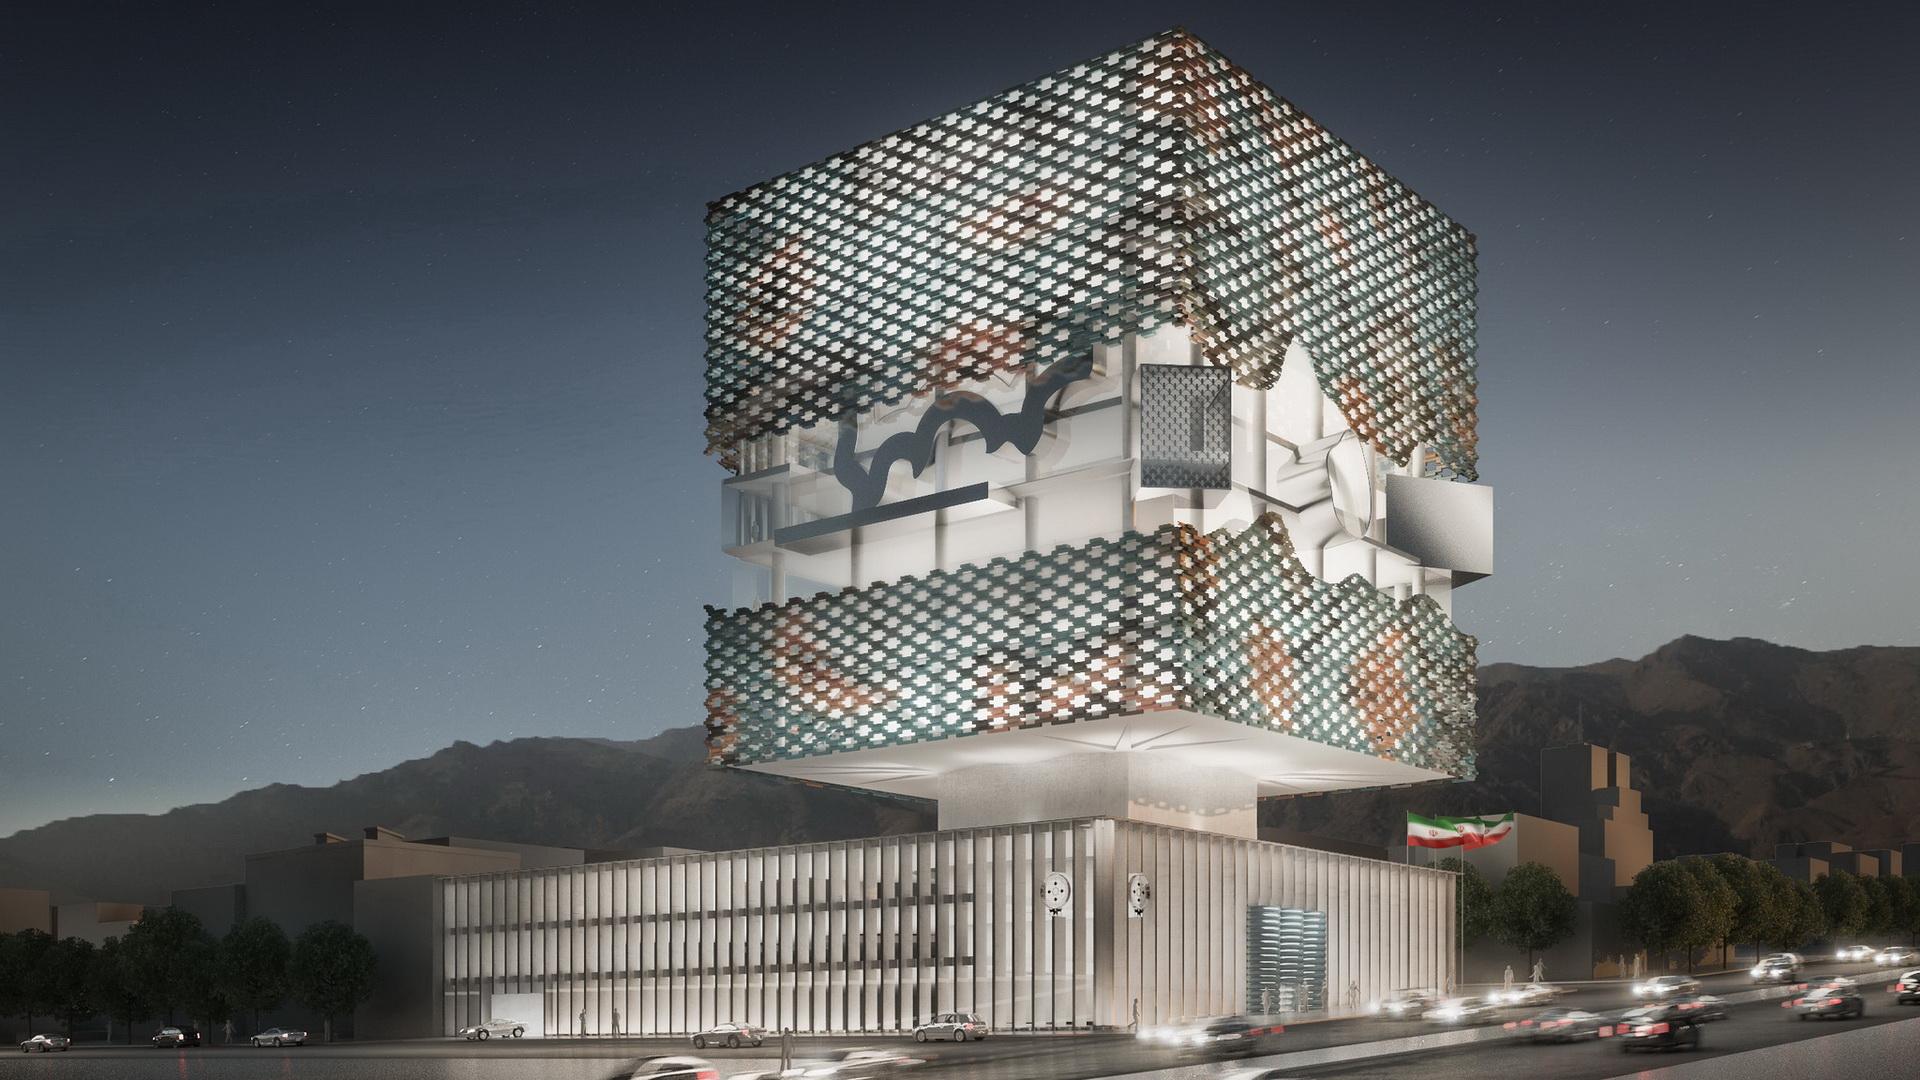 OHA - 711 TEHRAN STOCK EXCHANGE 10 - Office For Heuristic Architecture